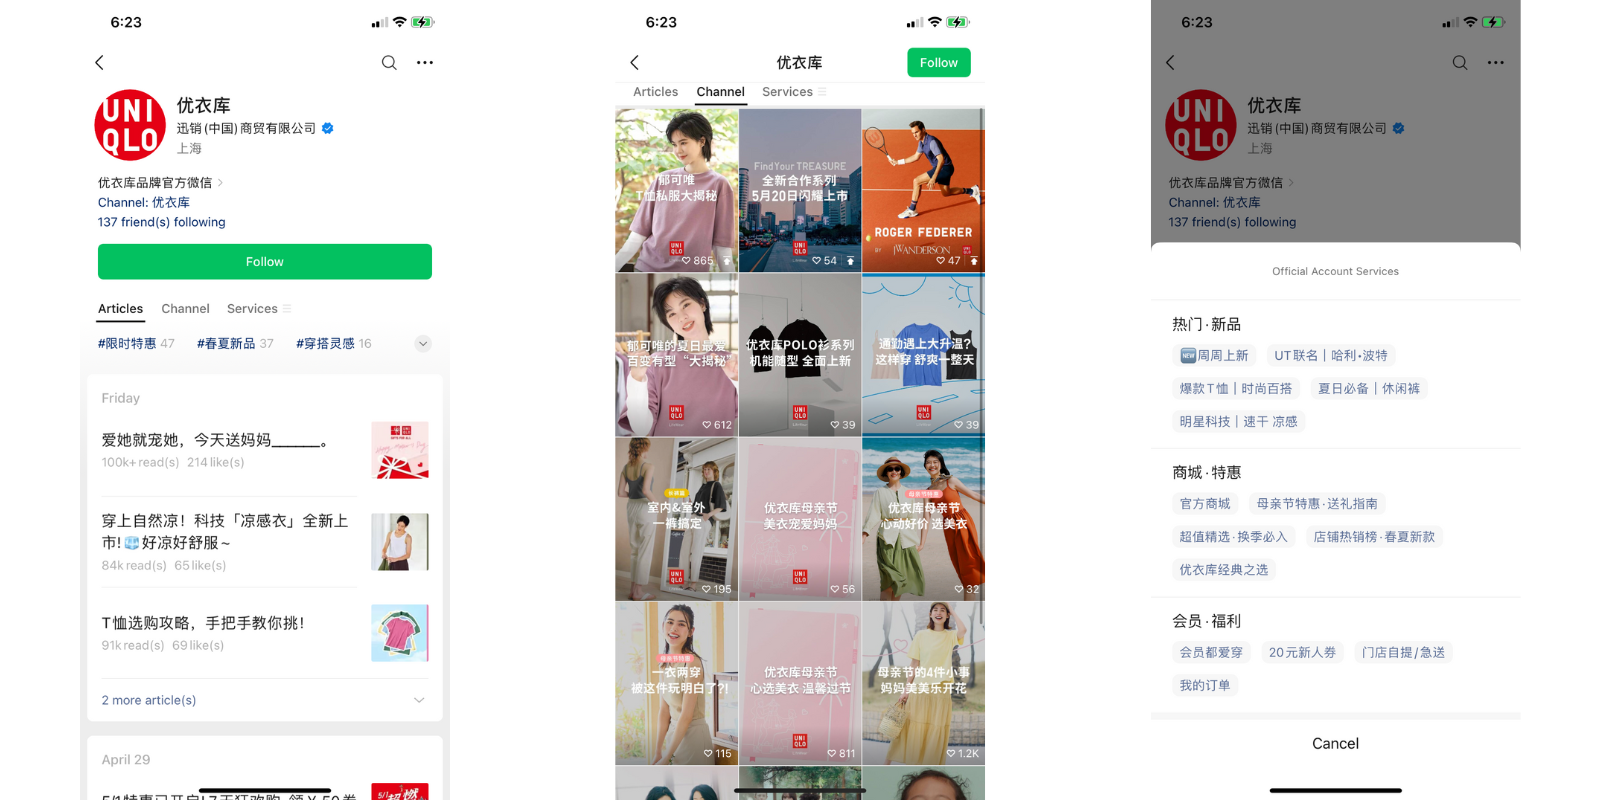 Uniqlo wechat official account interface